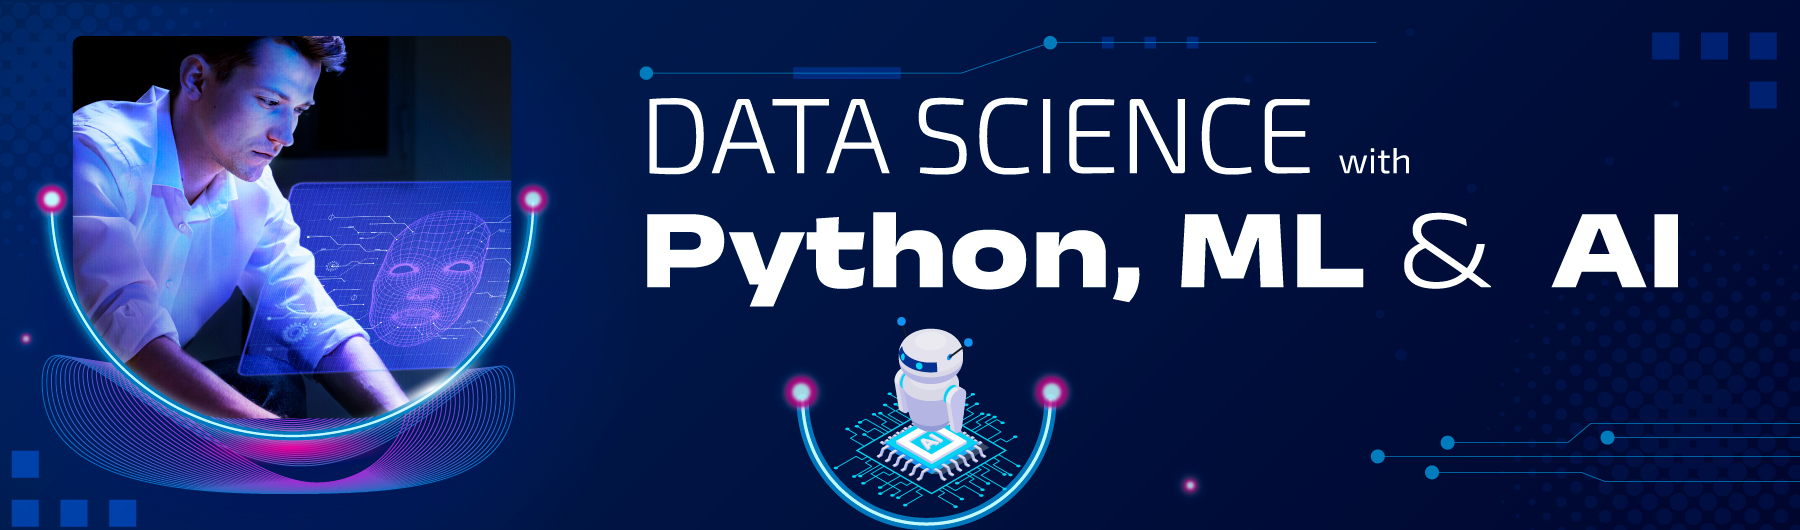 DATA SCIENCE WITH Python, ML and AI